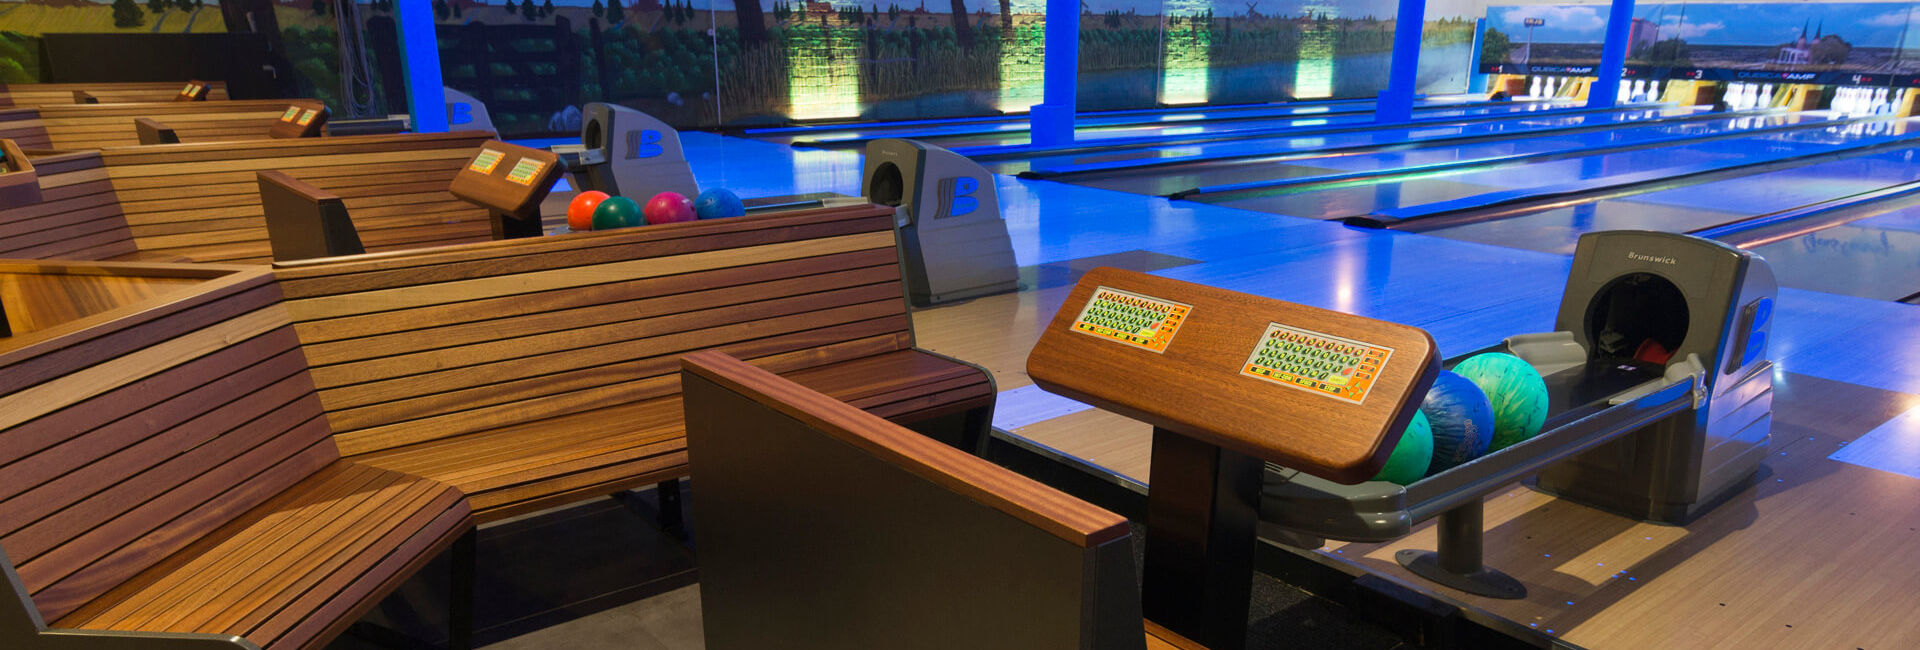 Bowling lanes and seats - Accessibility